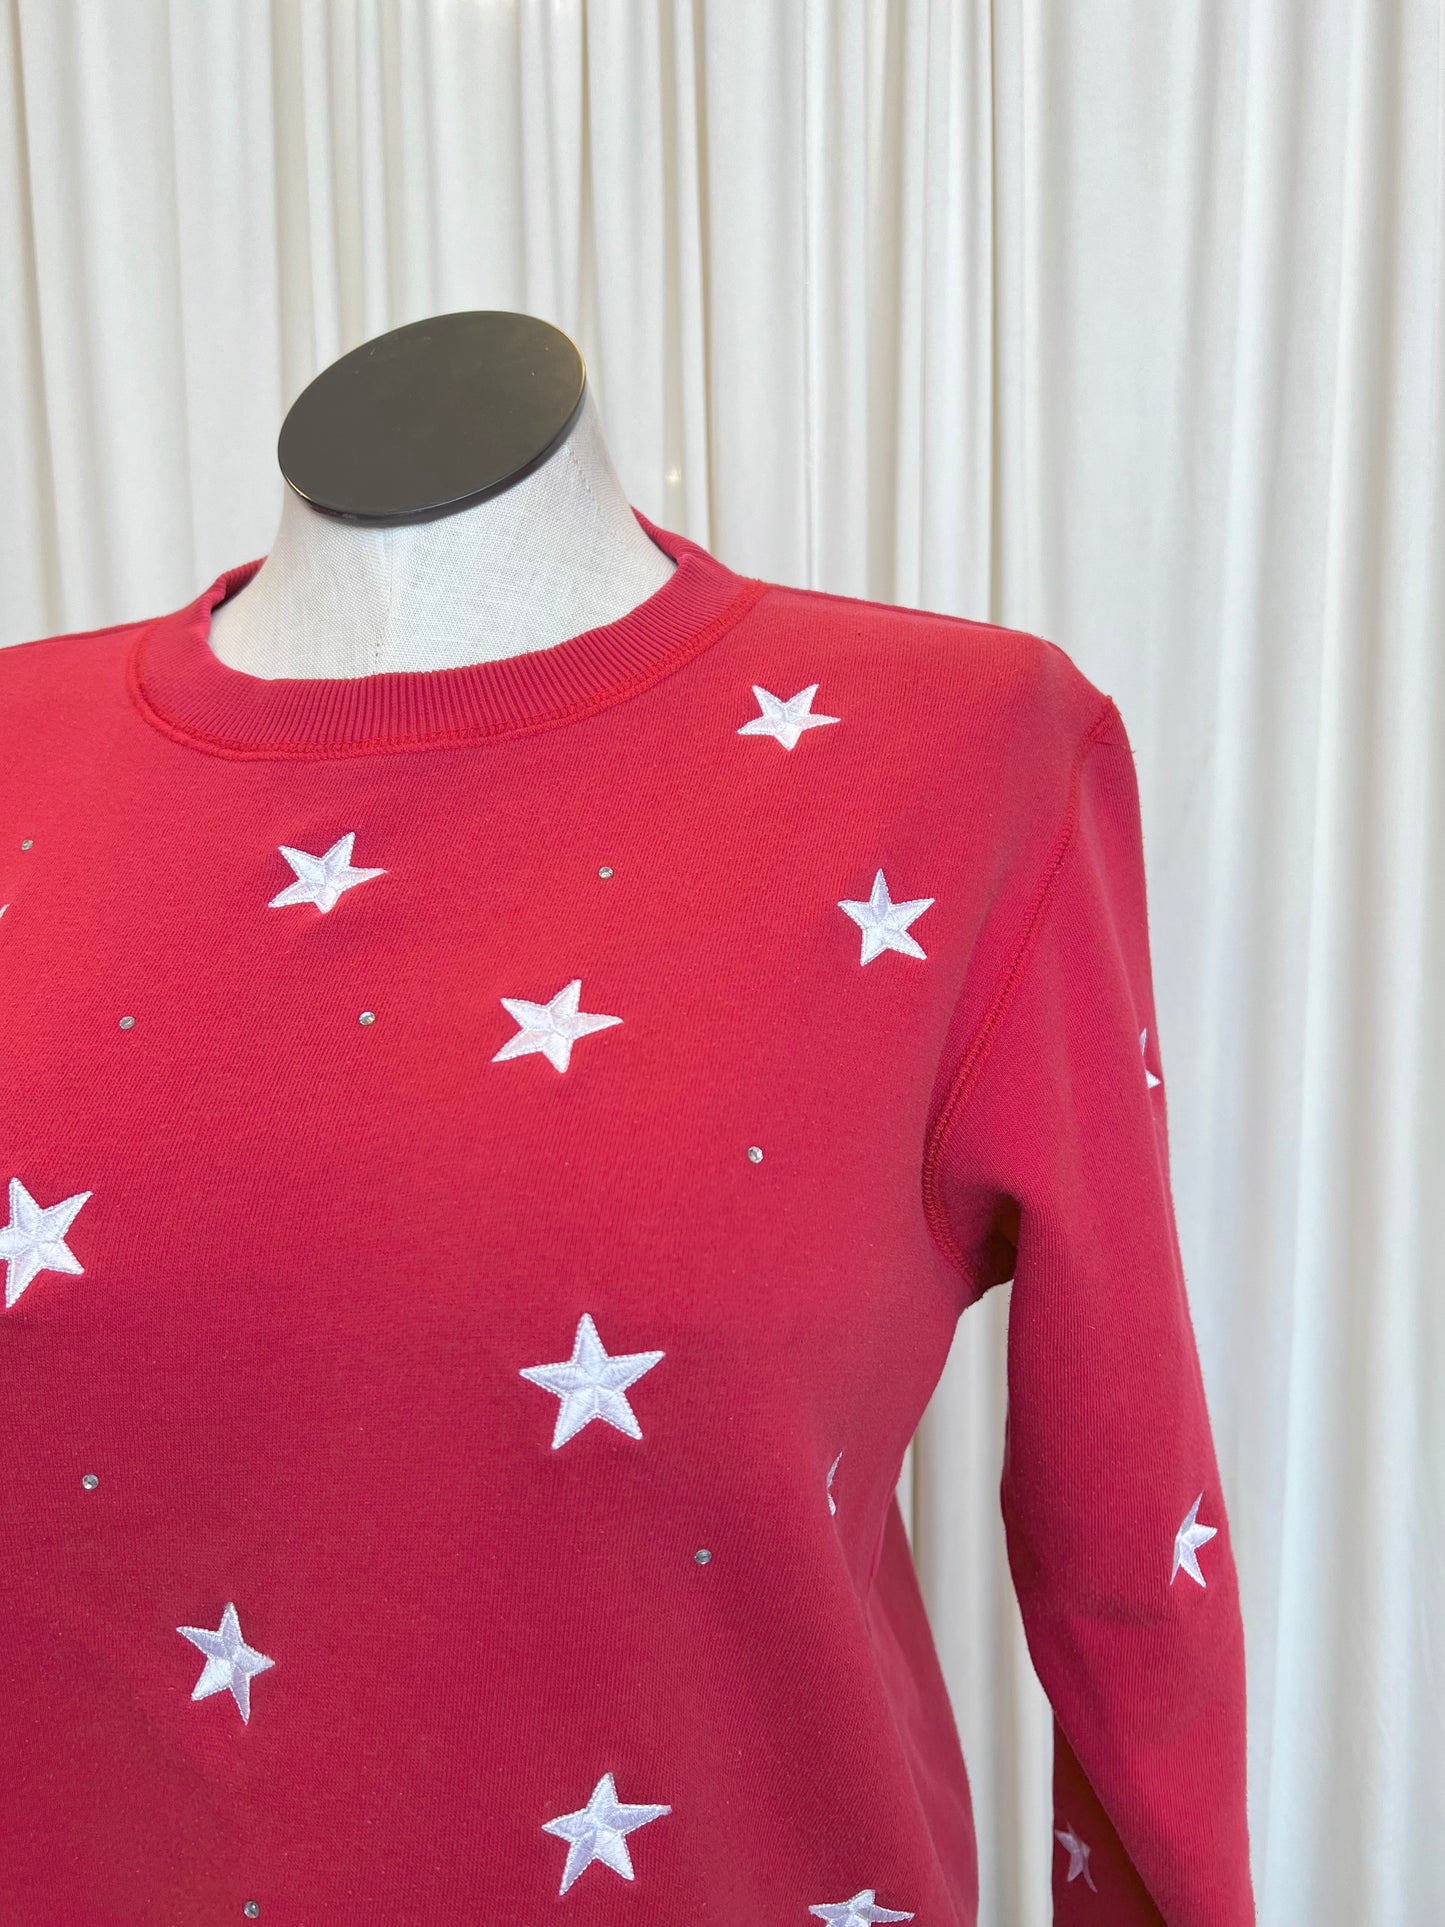 Star Patterned Red Crewneck - Small